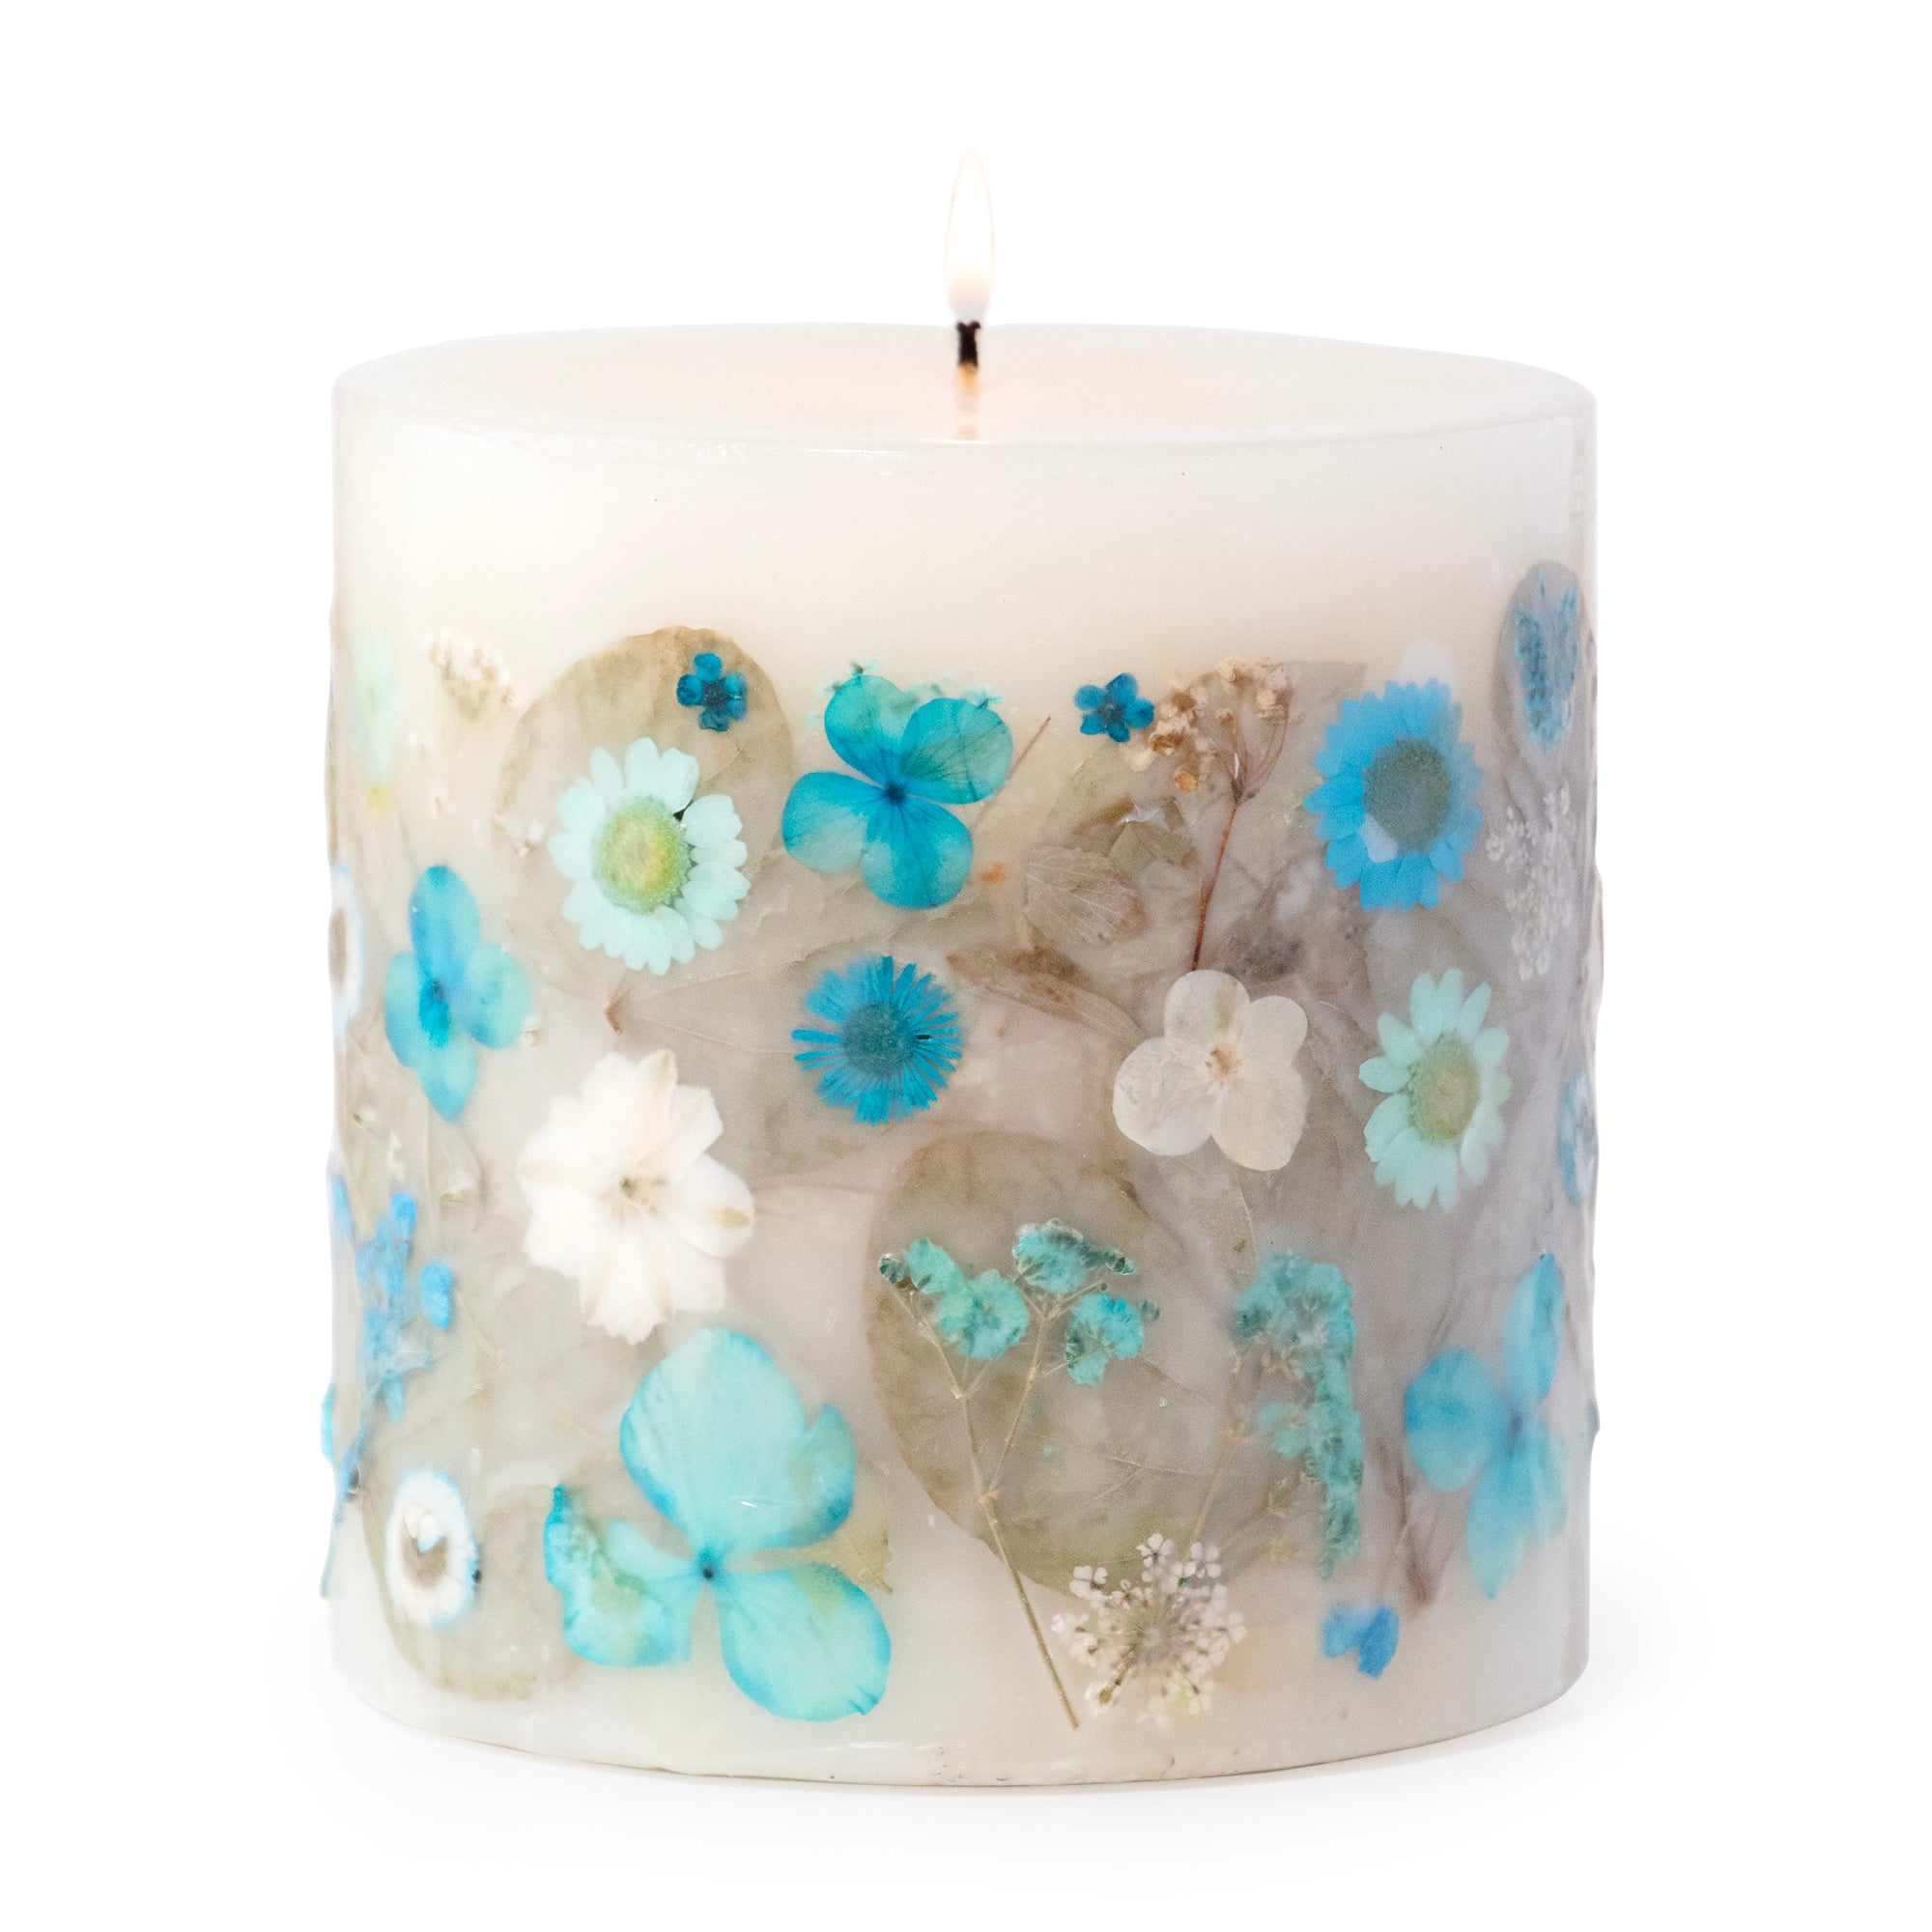 Bluebell Lace pillar candle with pressed blue and white flowers decorating the sides.